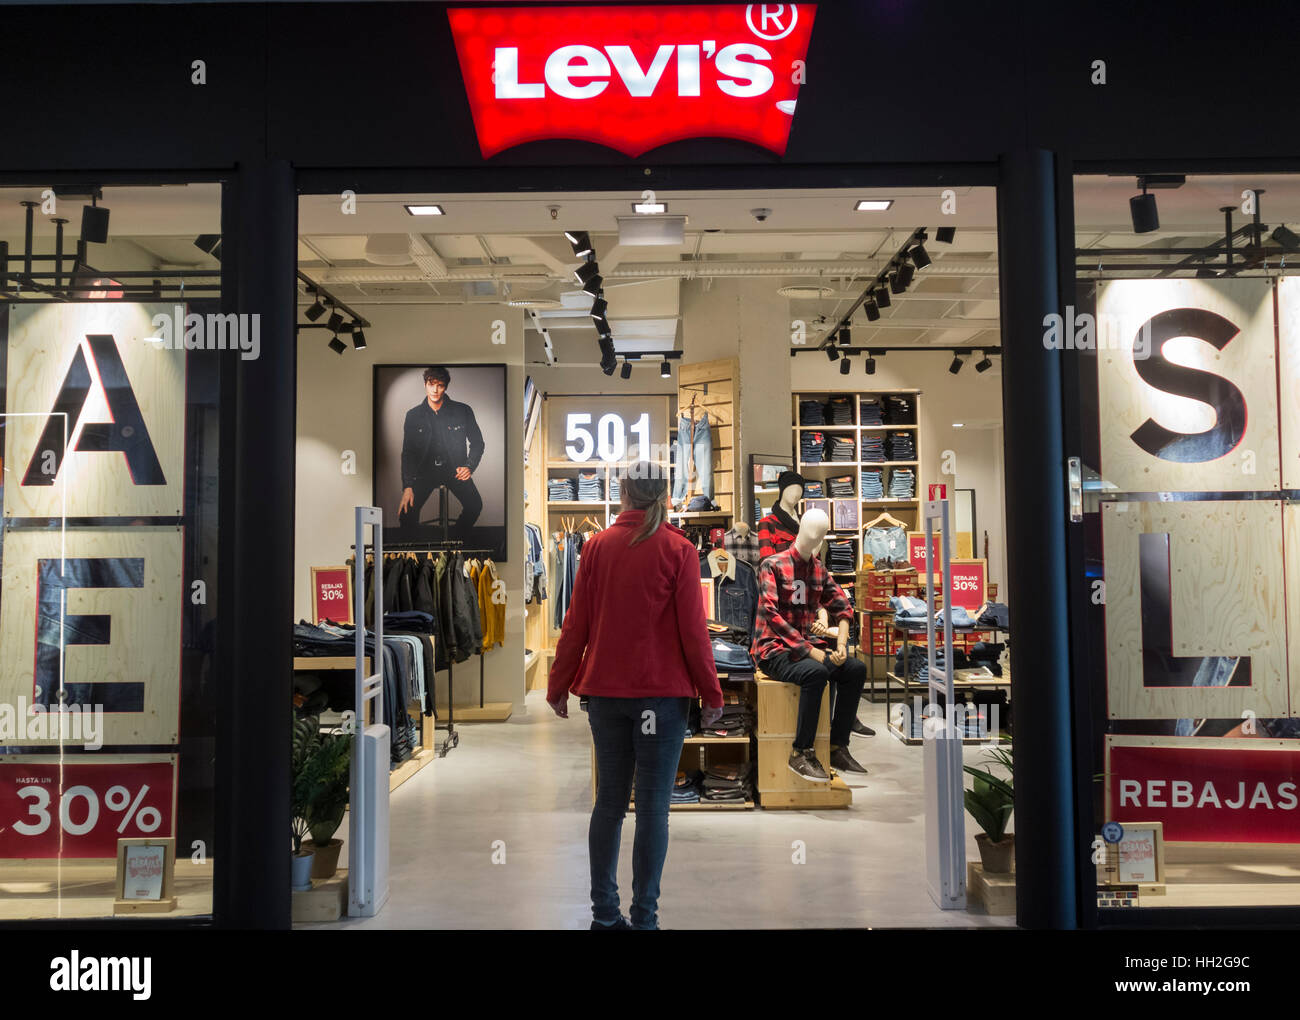 Levi store in Spain Stock Photo - Alamy